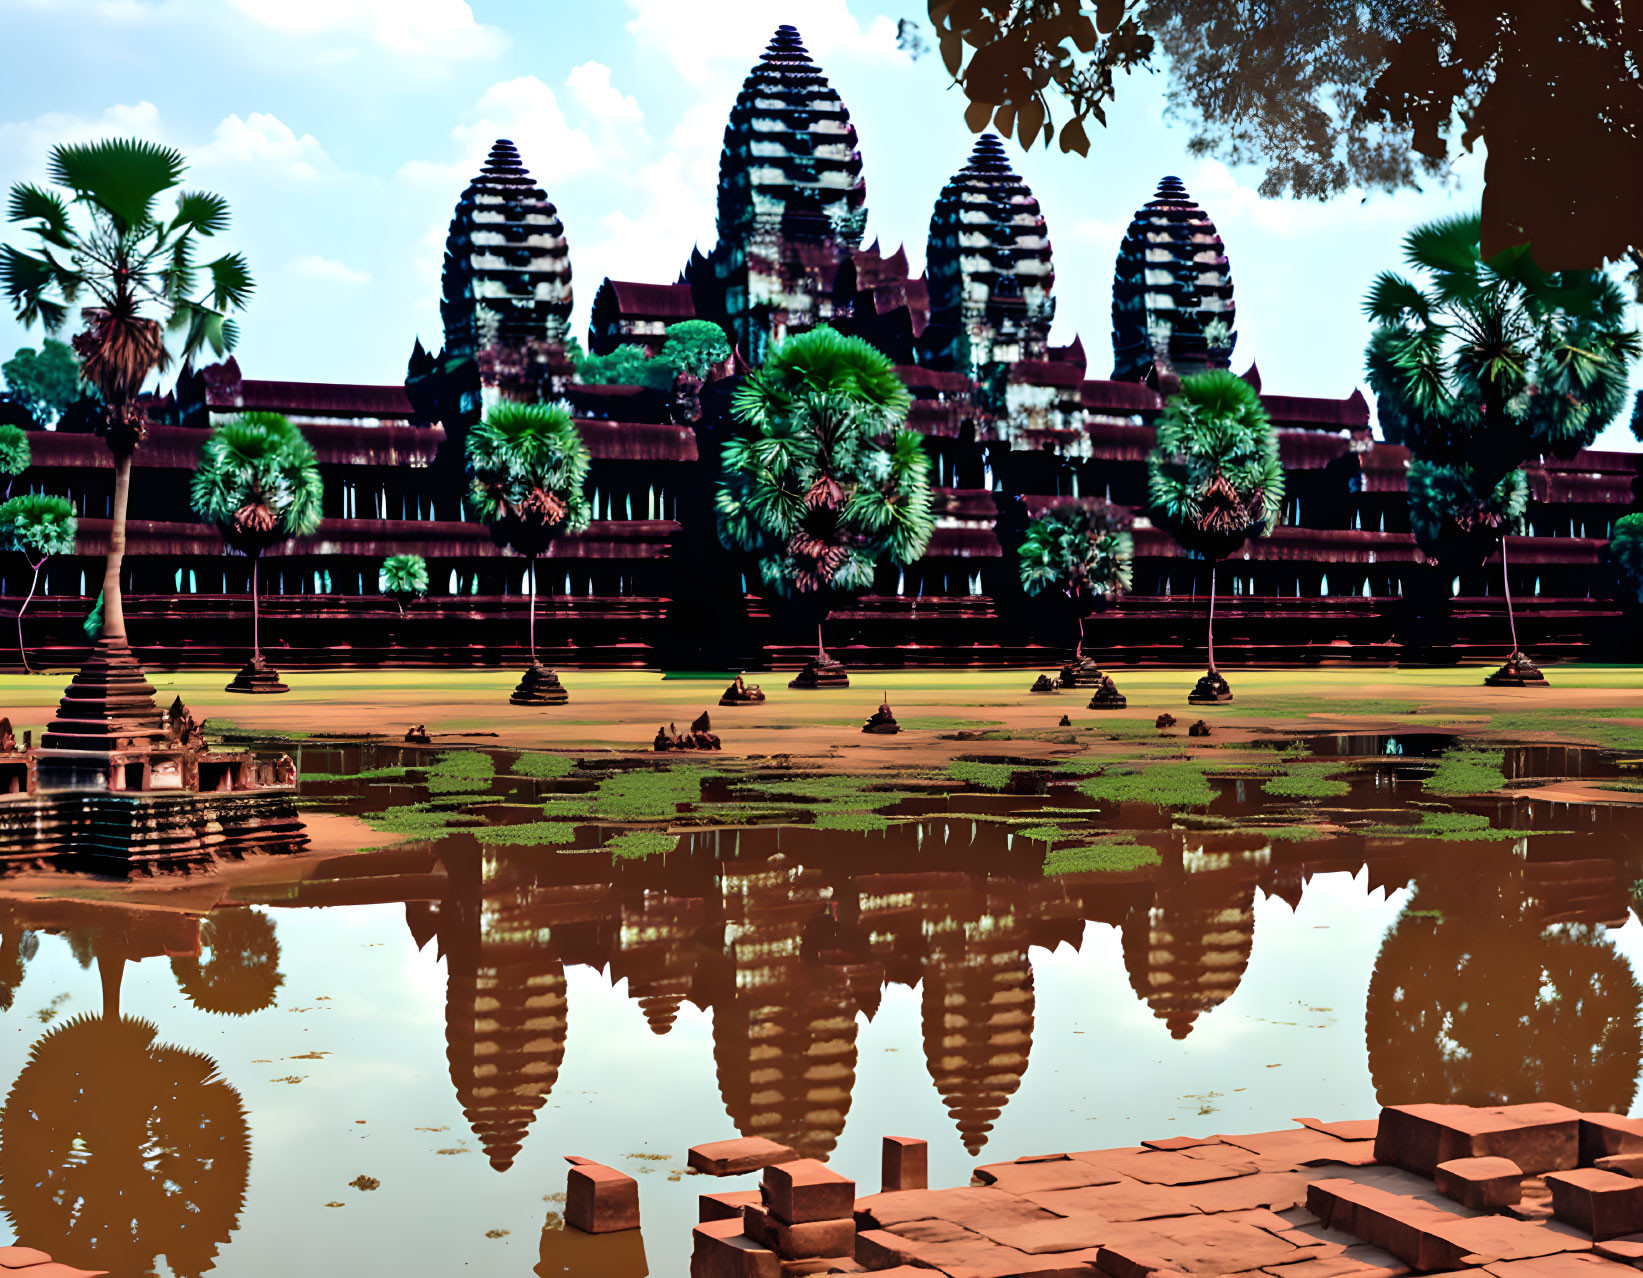 Majestic Angkor Wat temple complex with water reflection and tropical surroundings